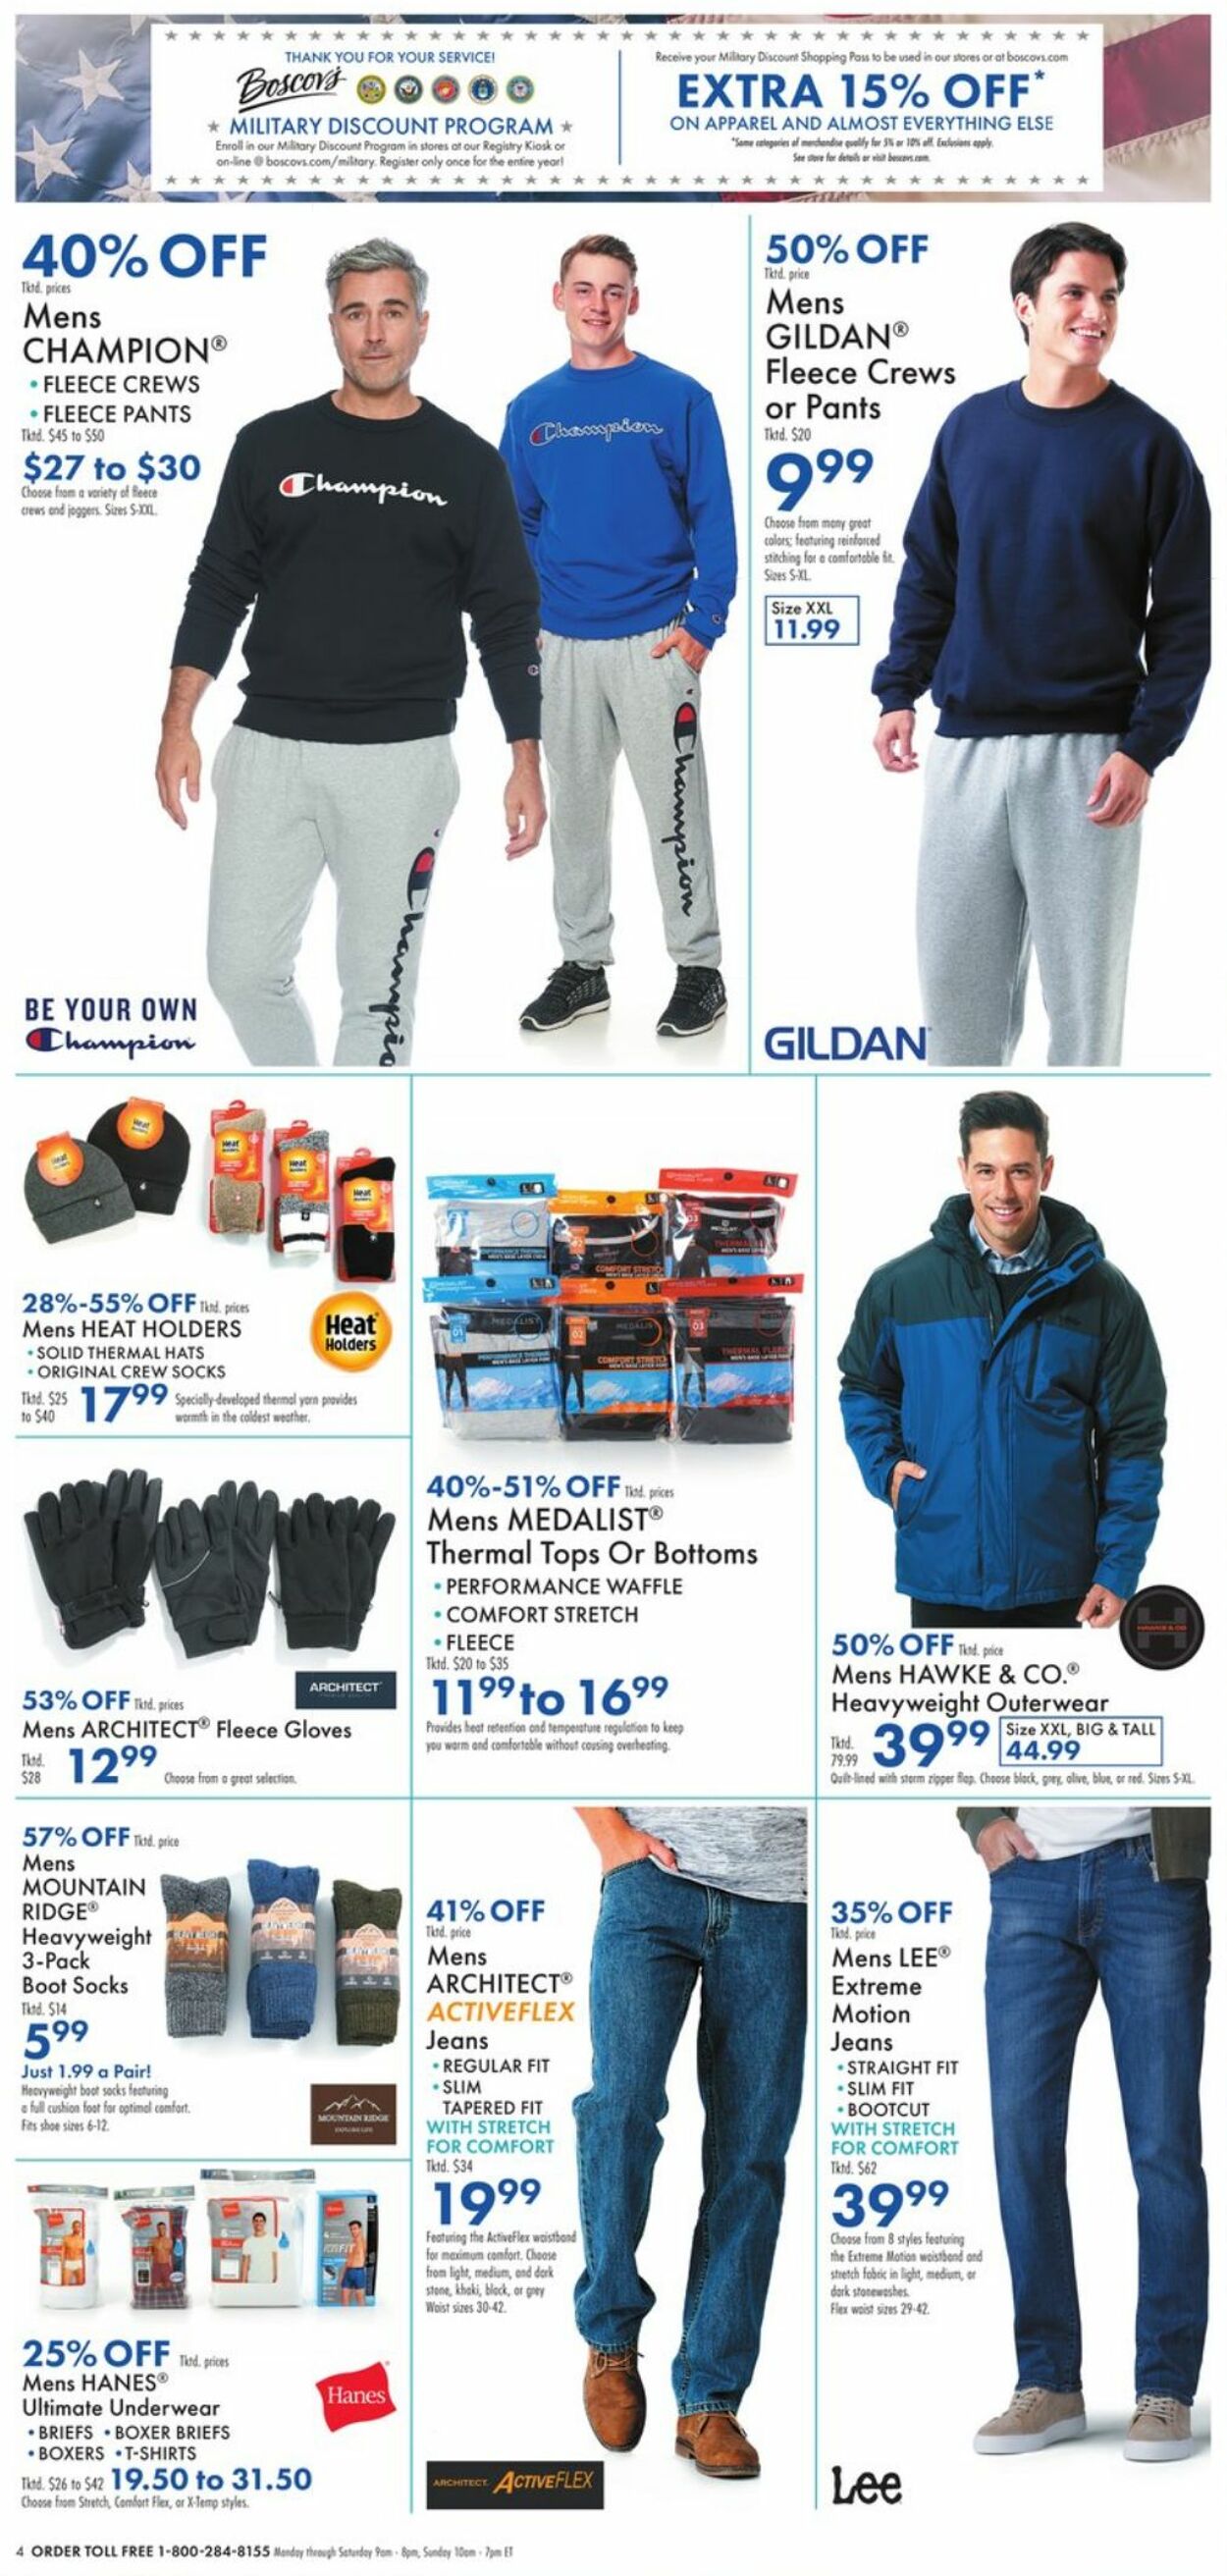 Boscov's Ad from 12/29/2022